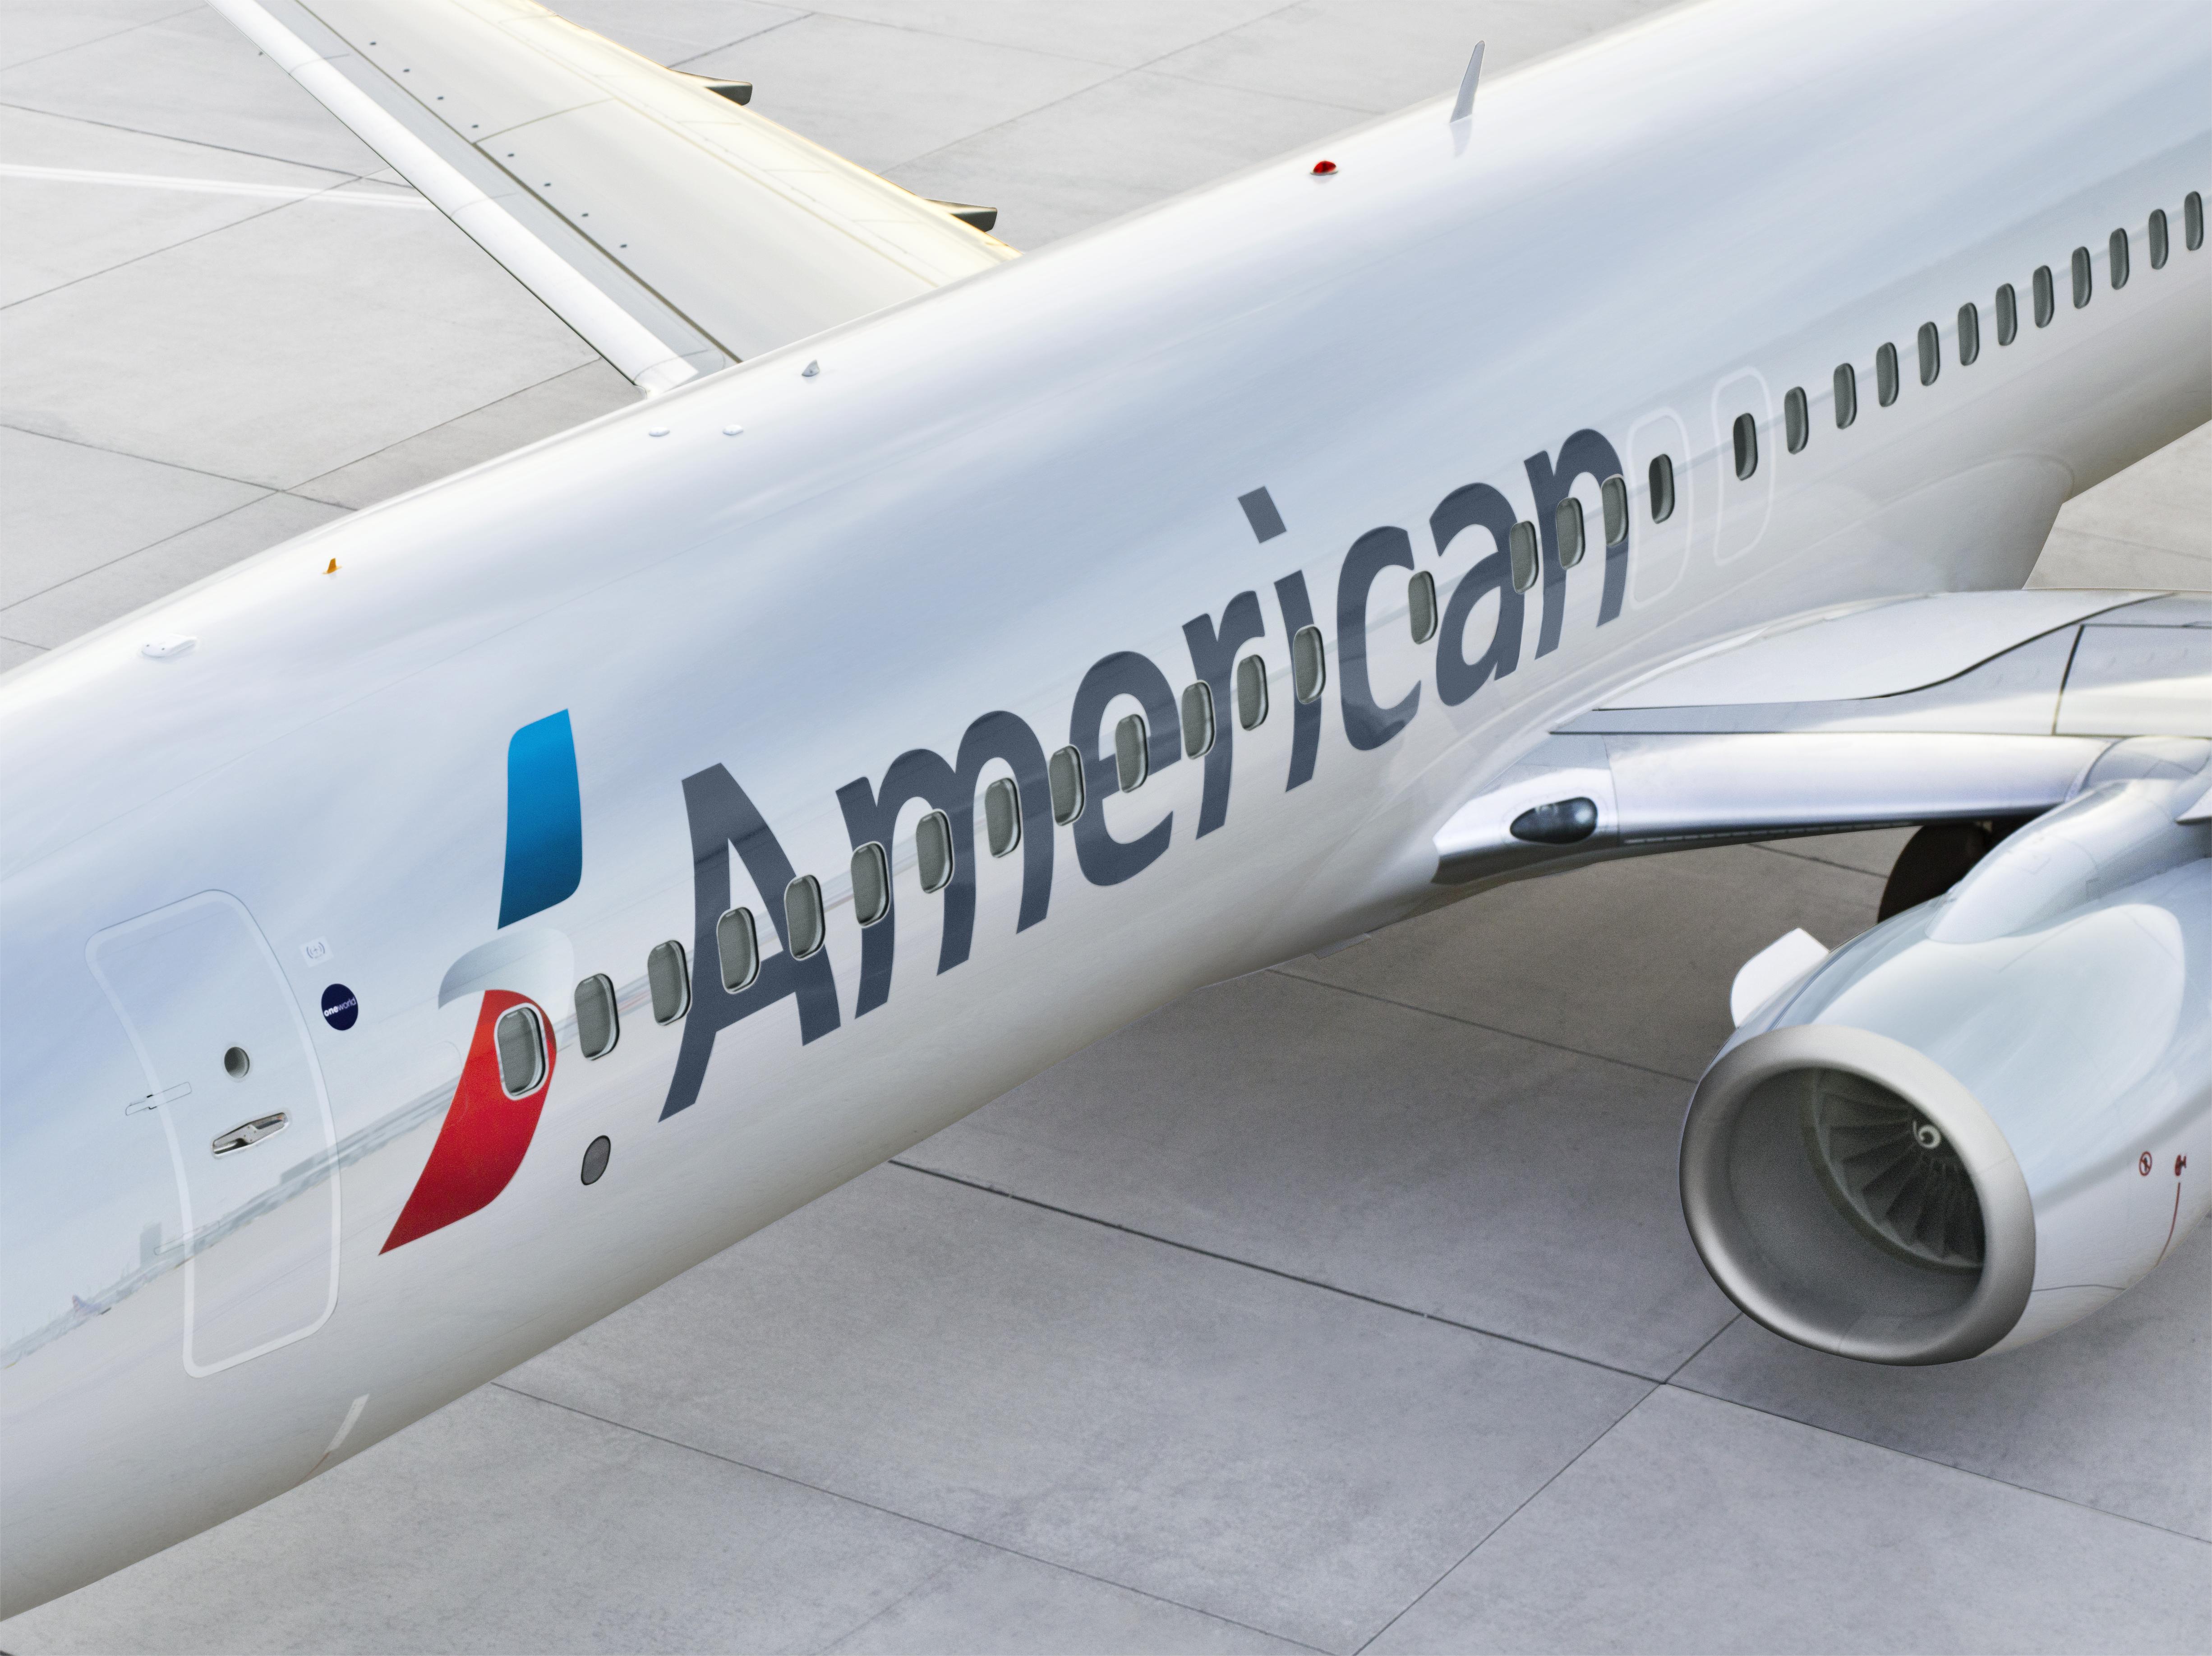 Earn up to 40,000 American Airlines Miles for Transatlantic Flights